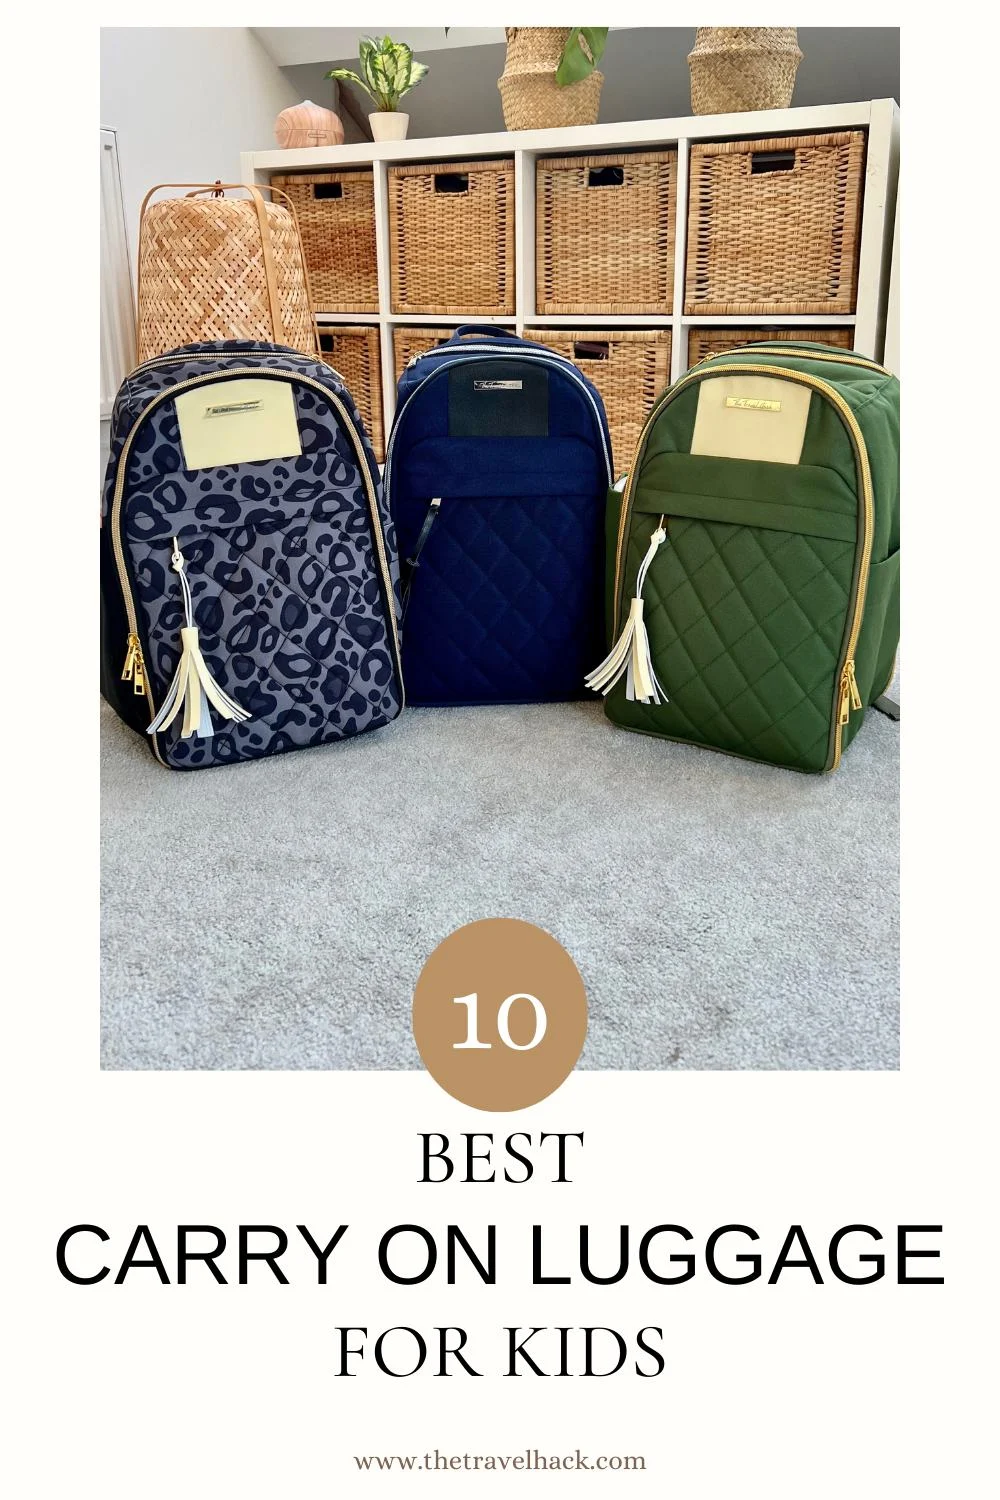 The best carry on luggage for children